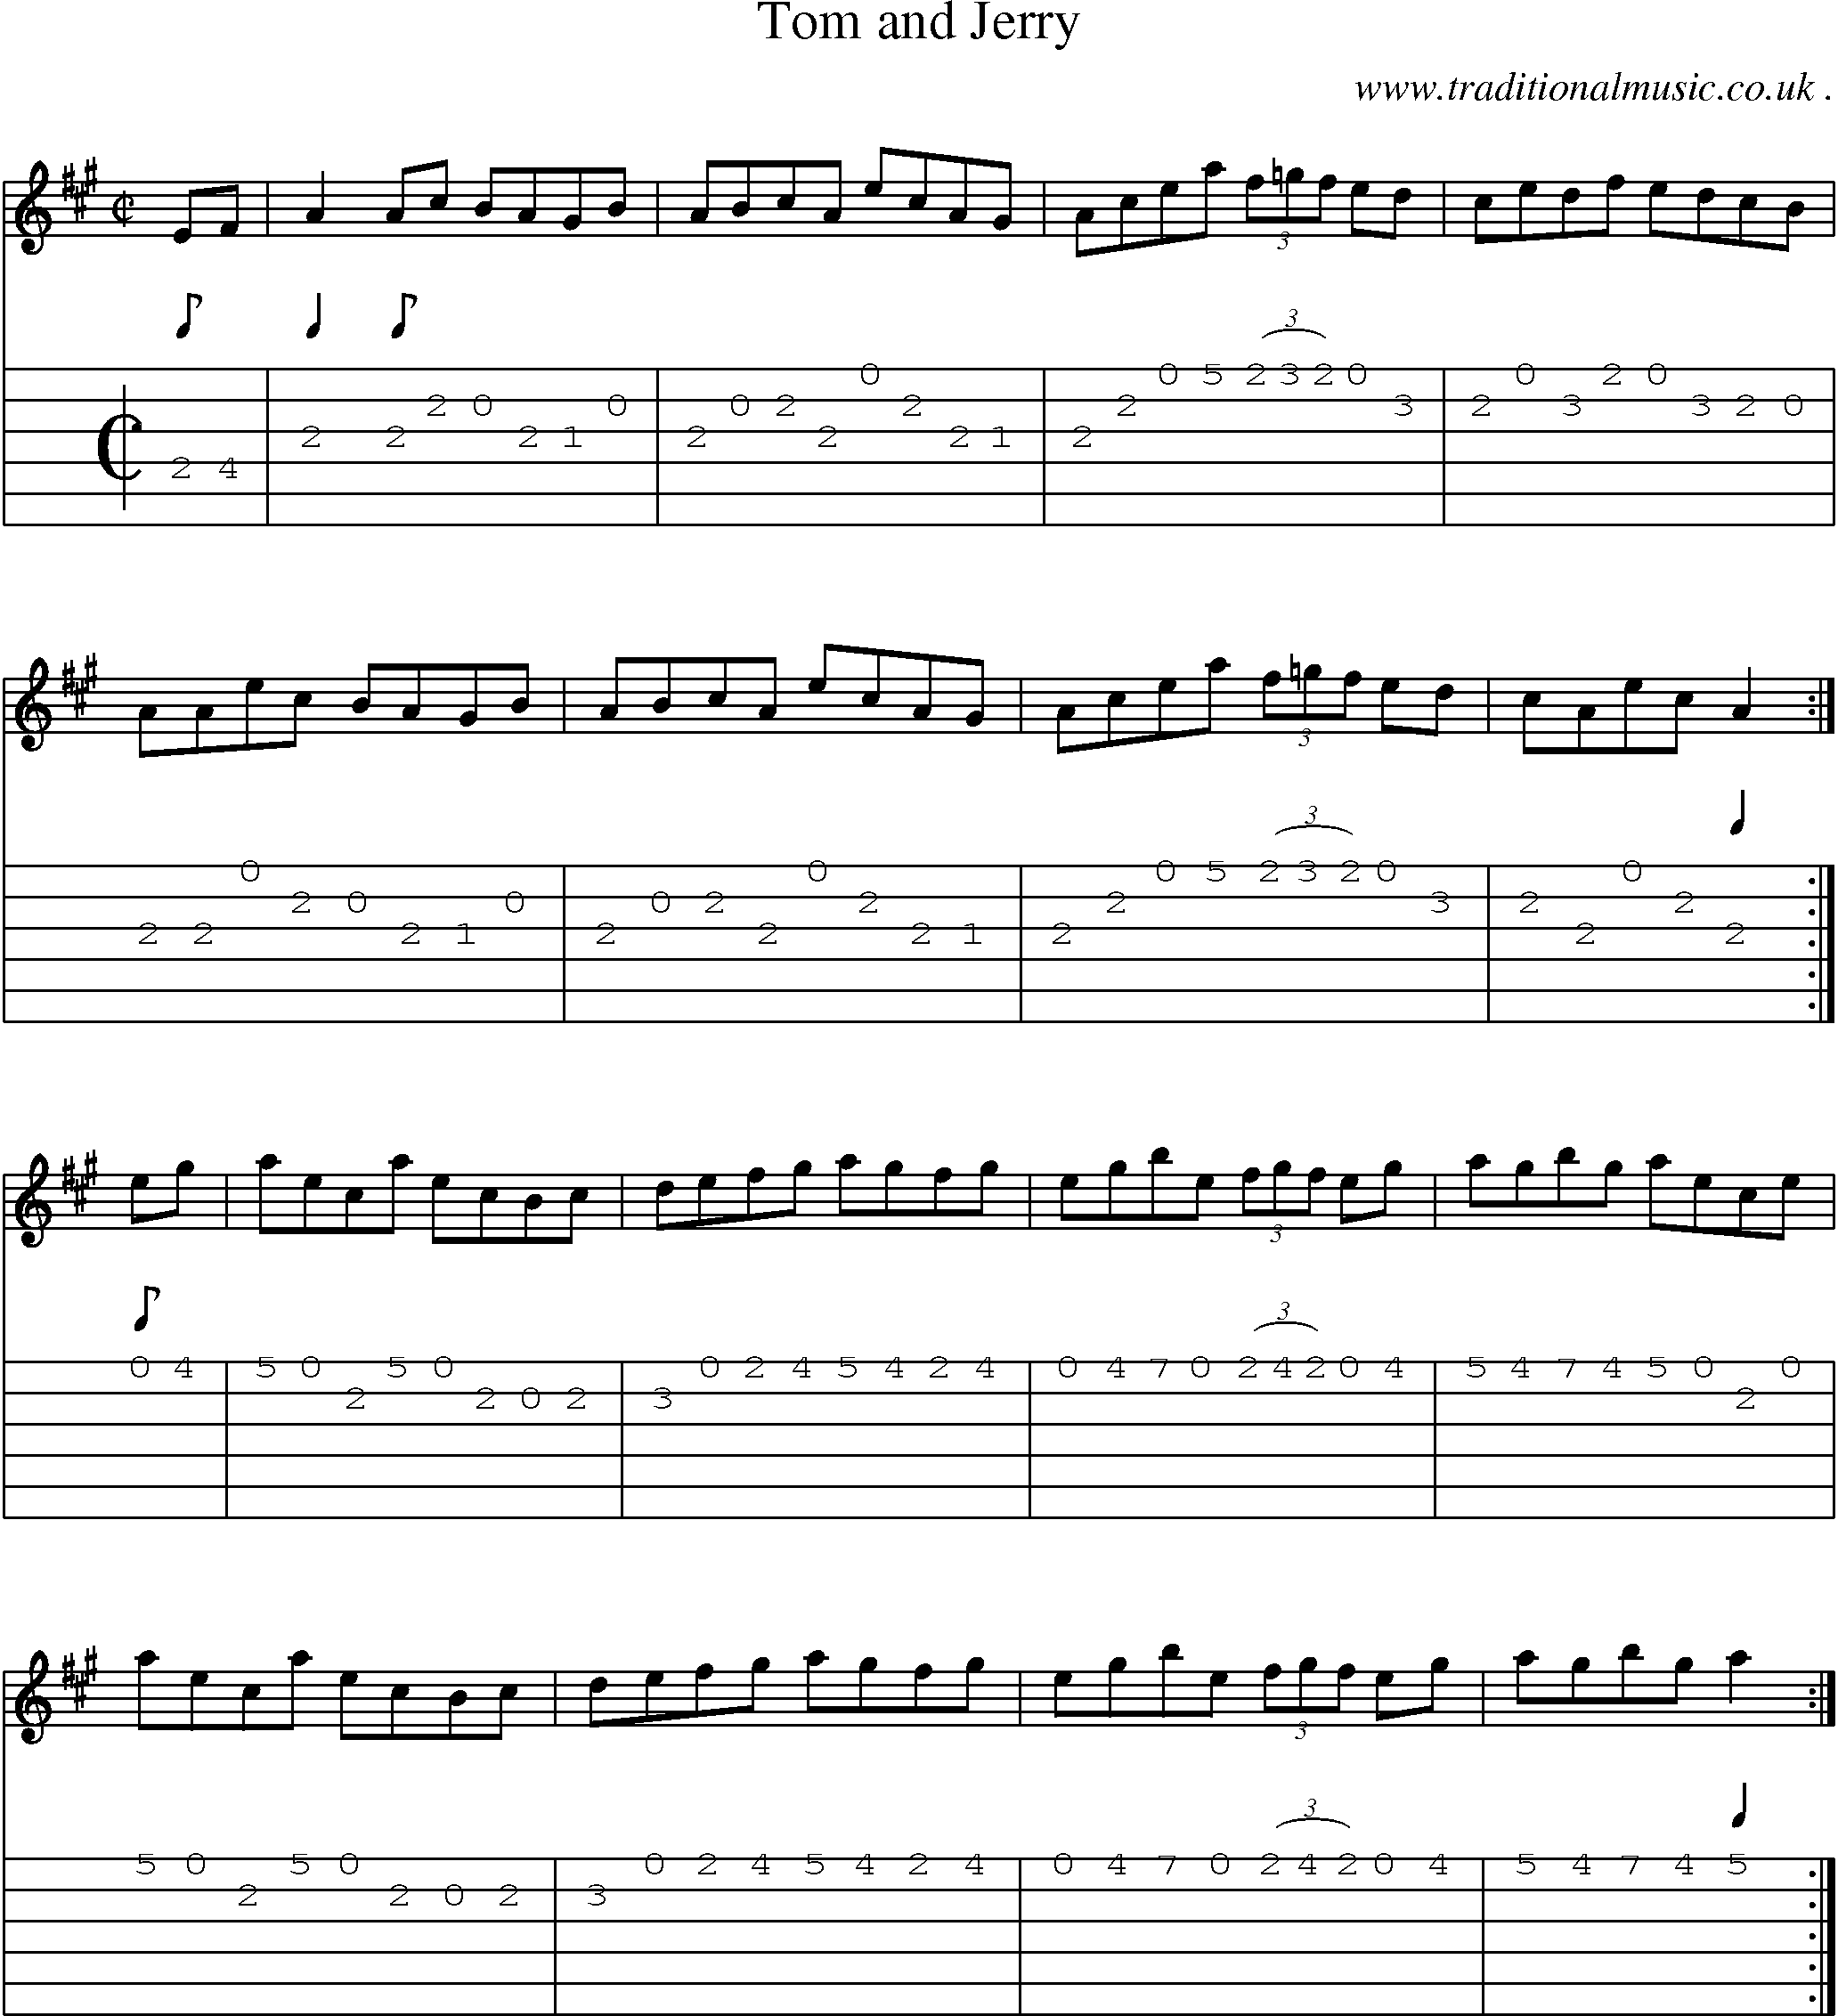 Sheet-music  score, Chords and Guitar Tabs for Tom And Jerry